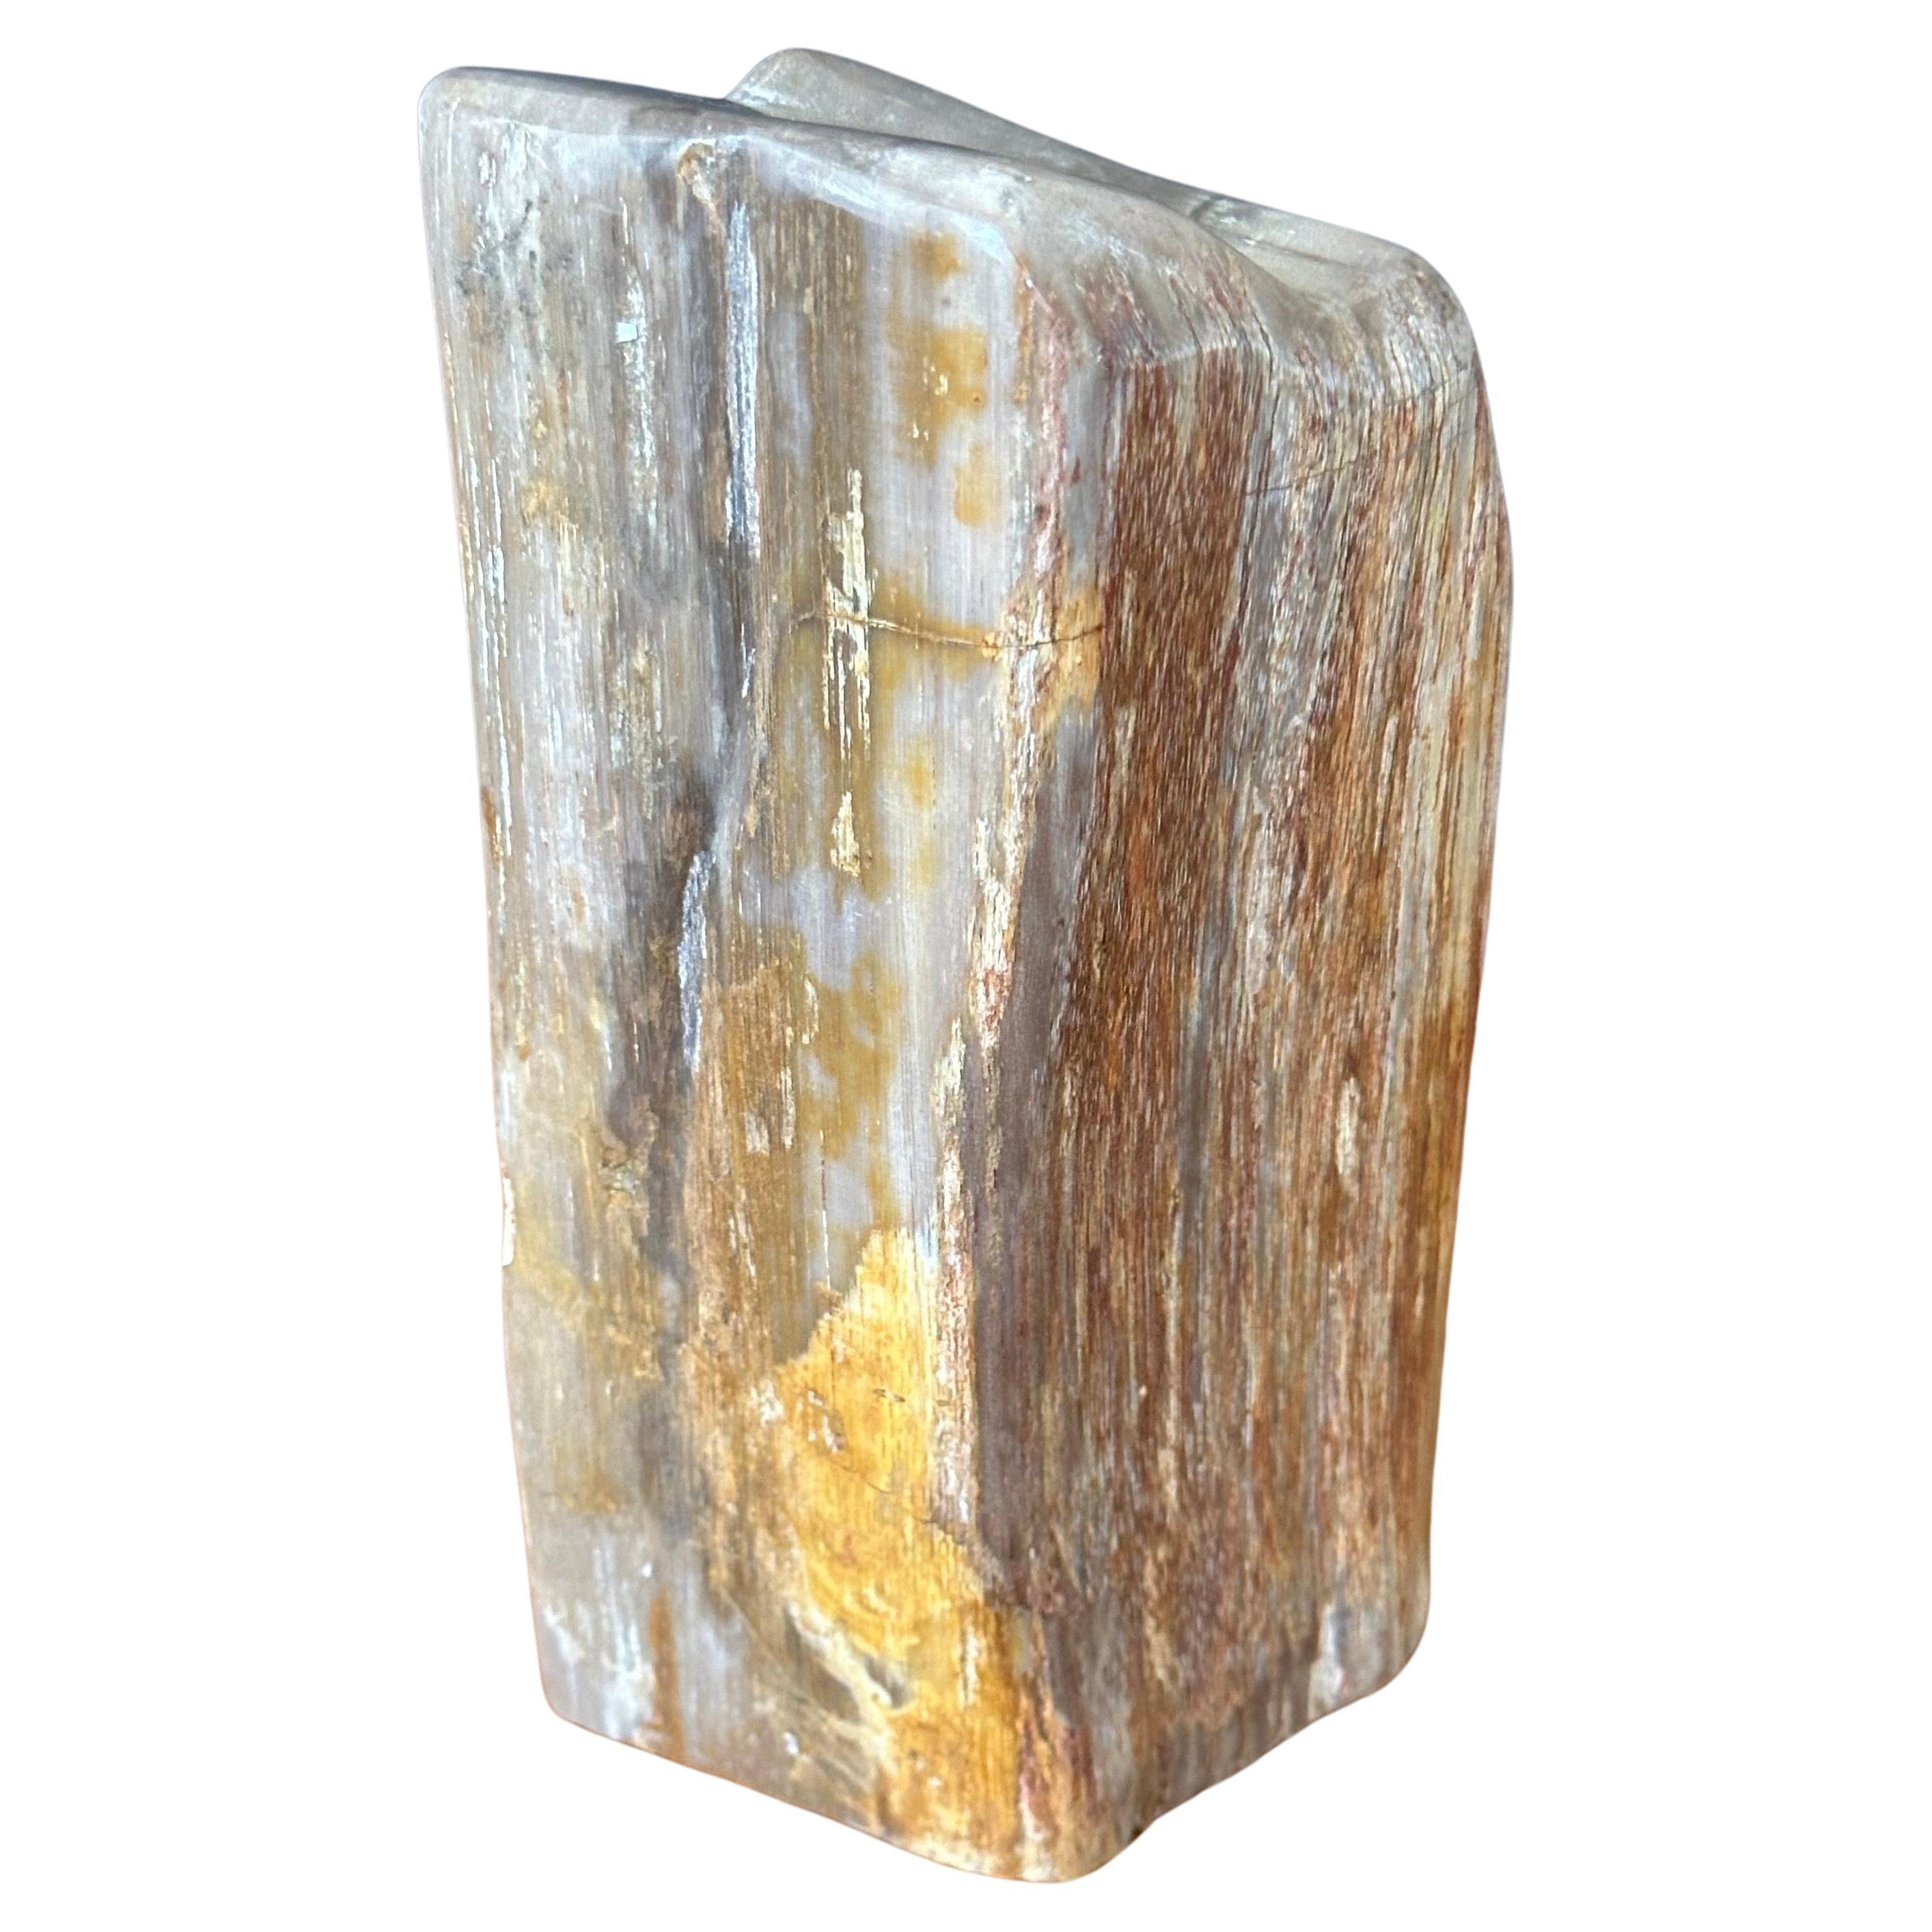 Polished Petrified Wood Sculpture For Sale